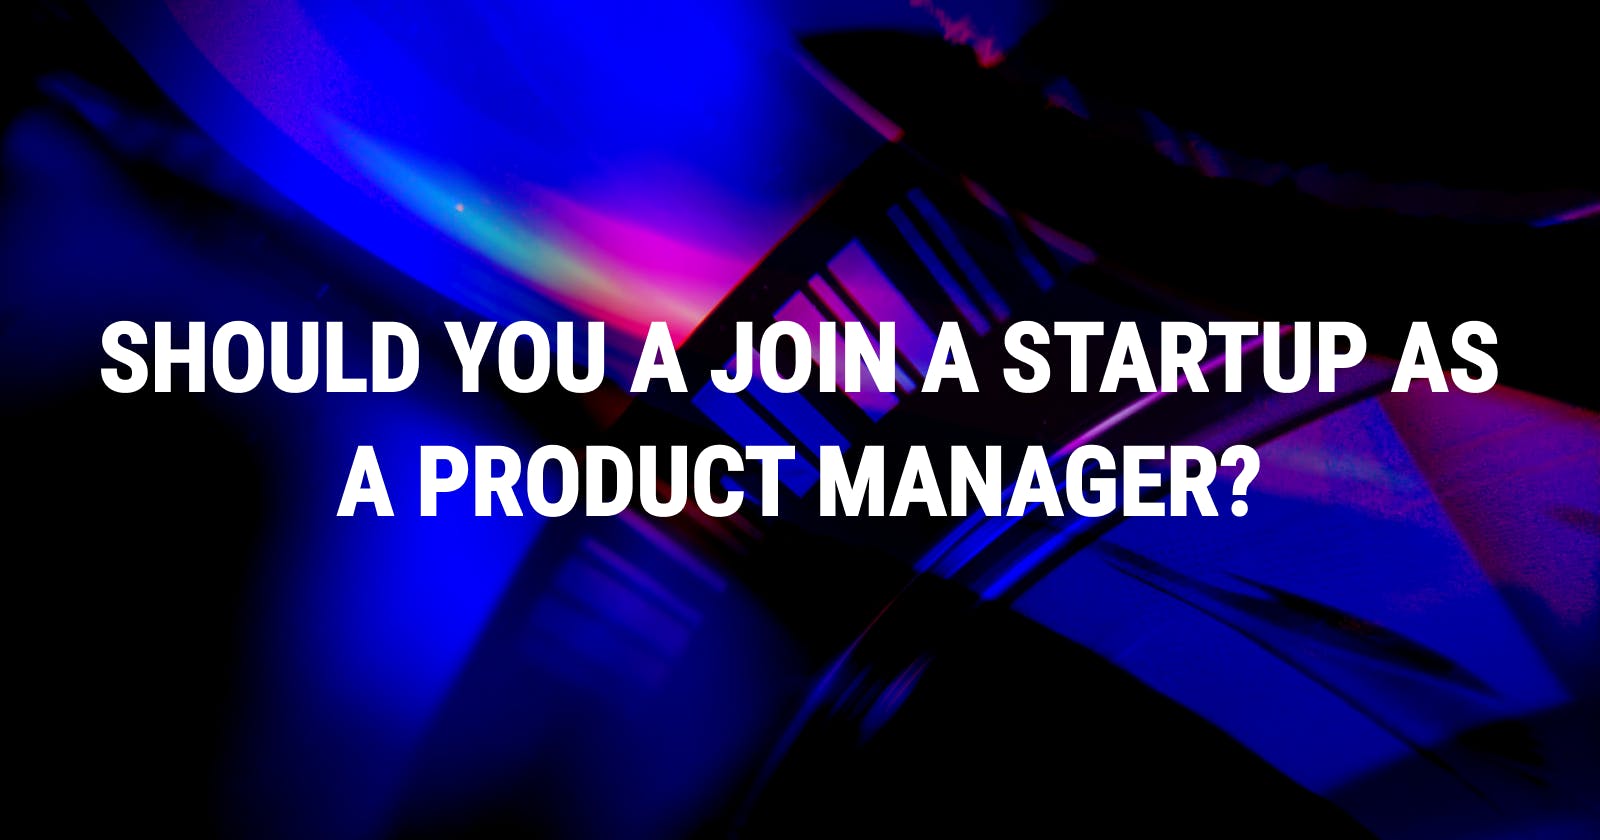 Should you join a "Startup" as a Product Manager?